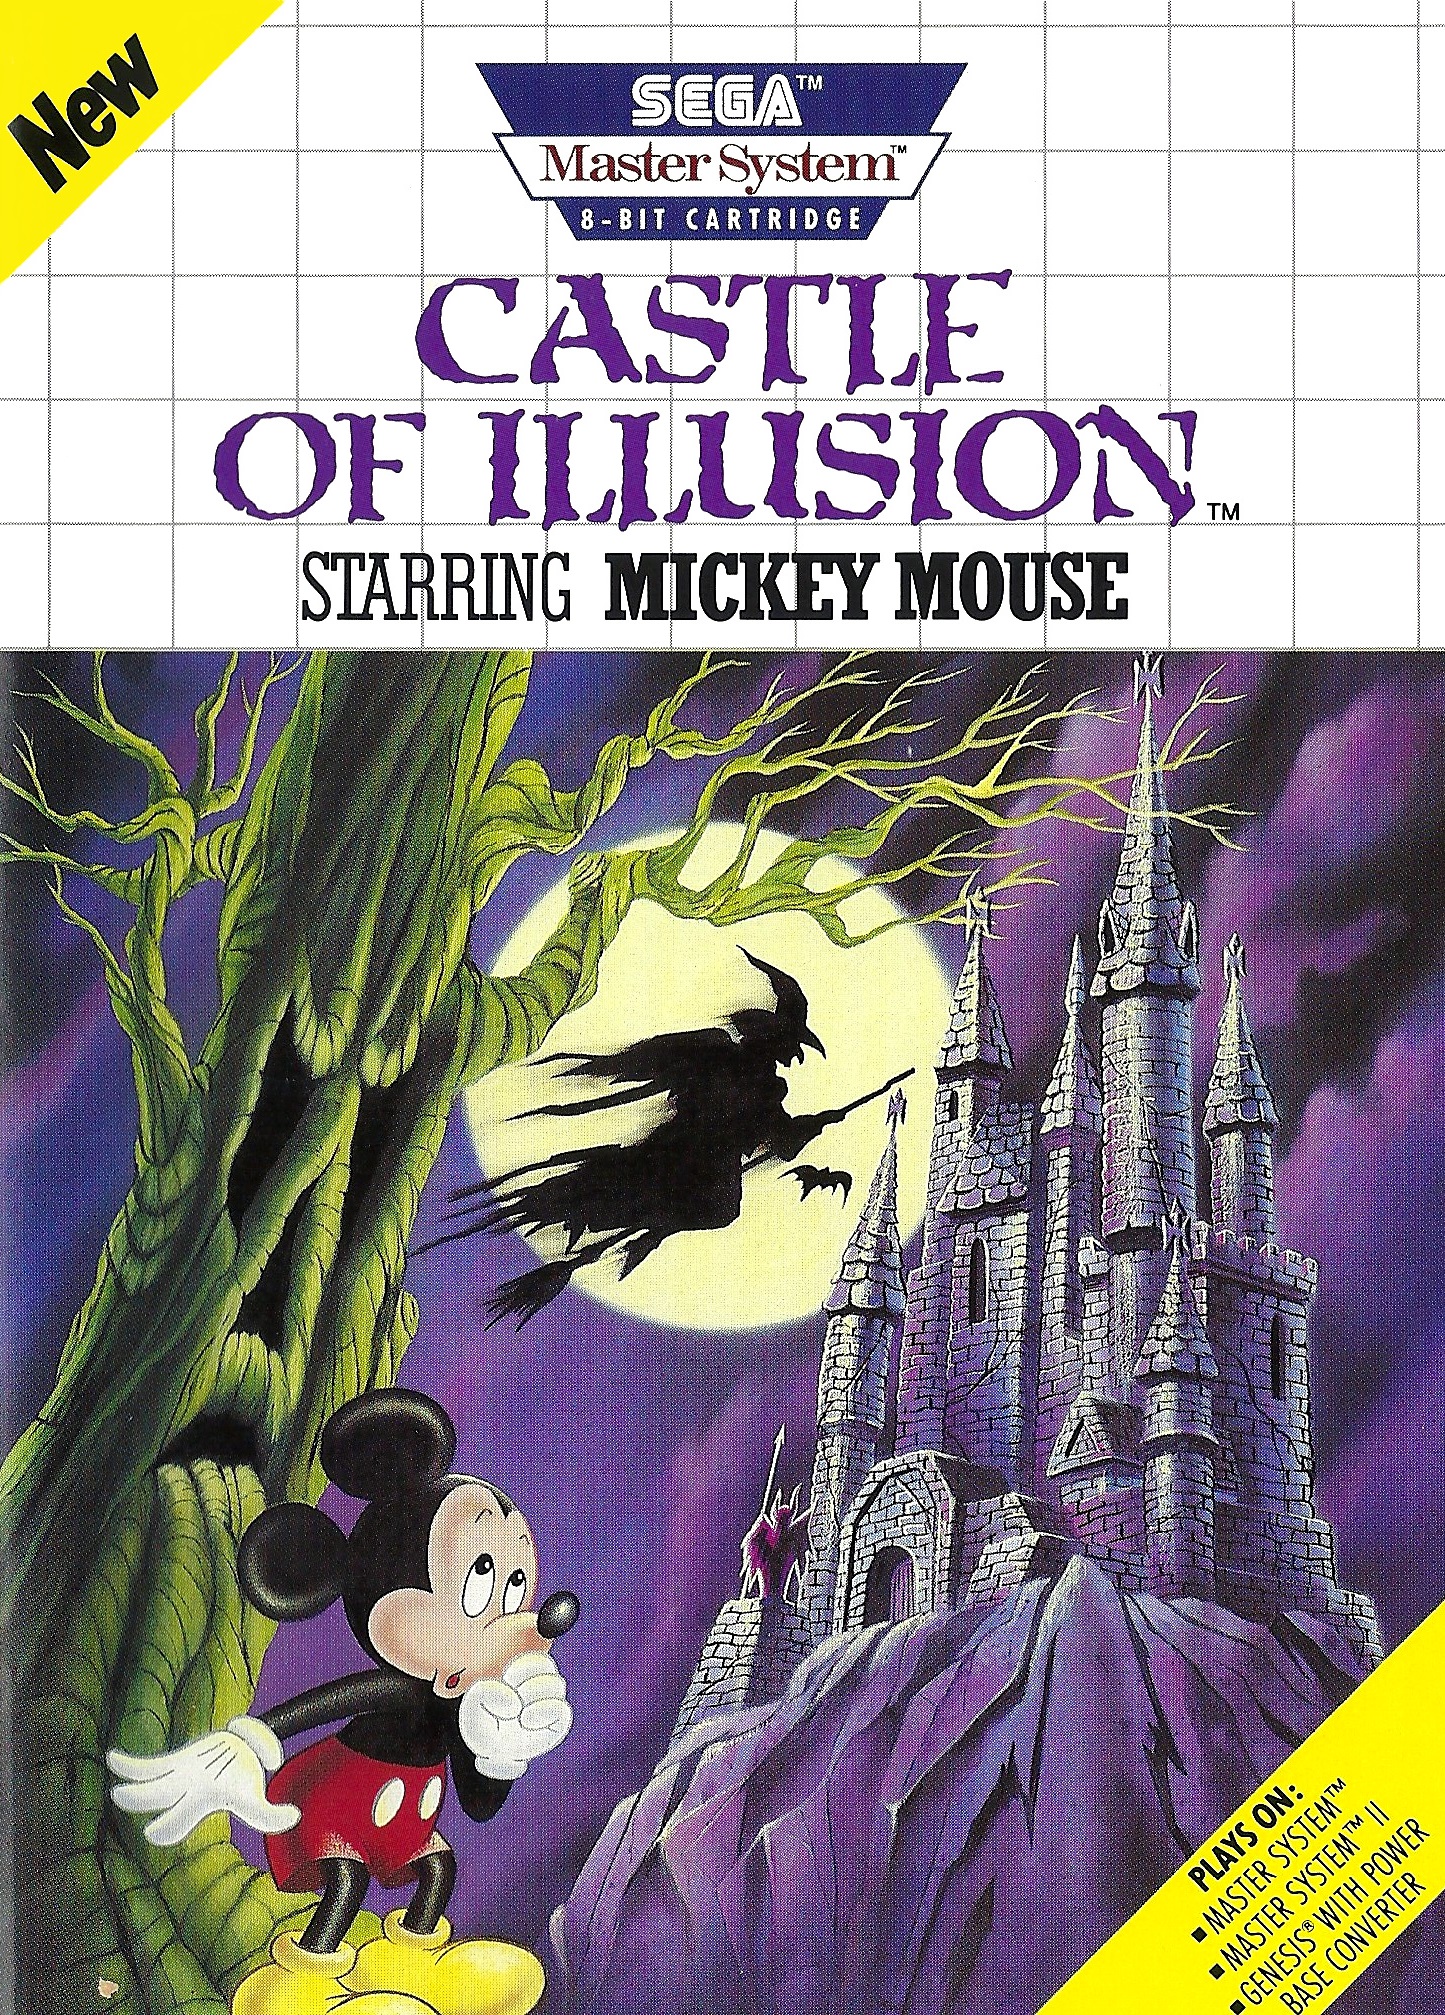 стим castle of illusion starring mickey mouse фото 107